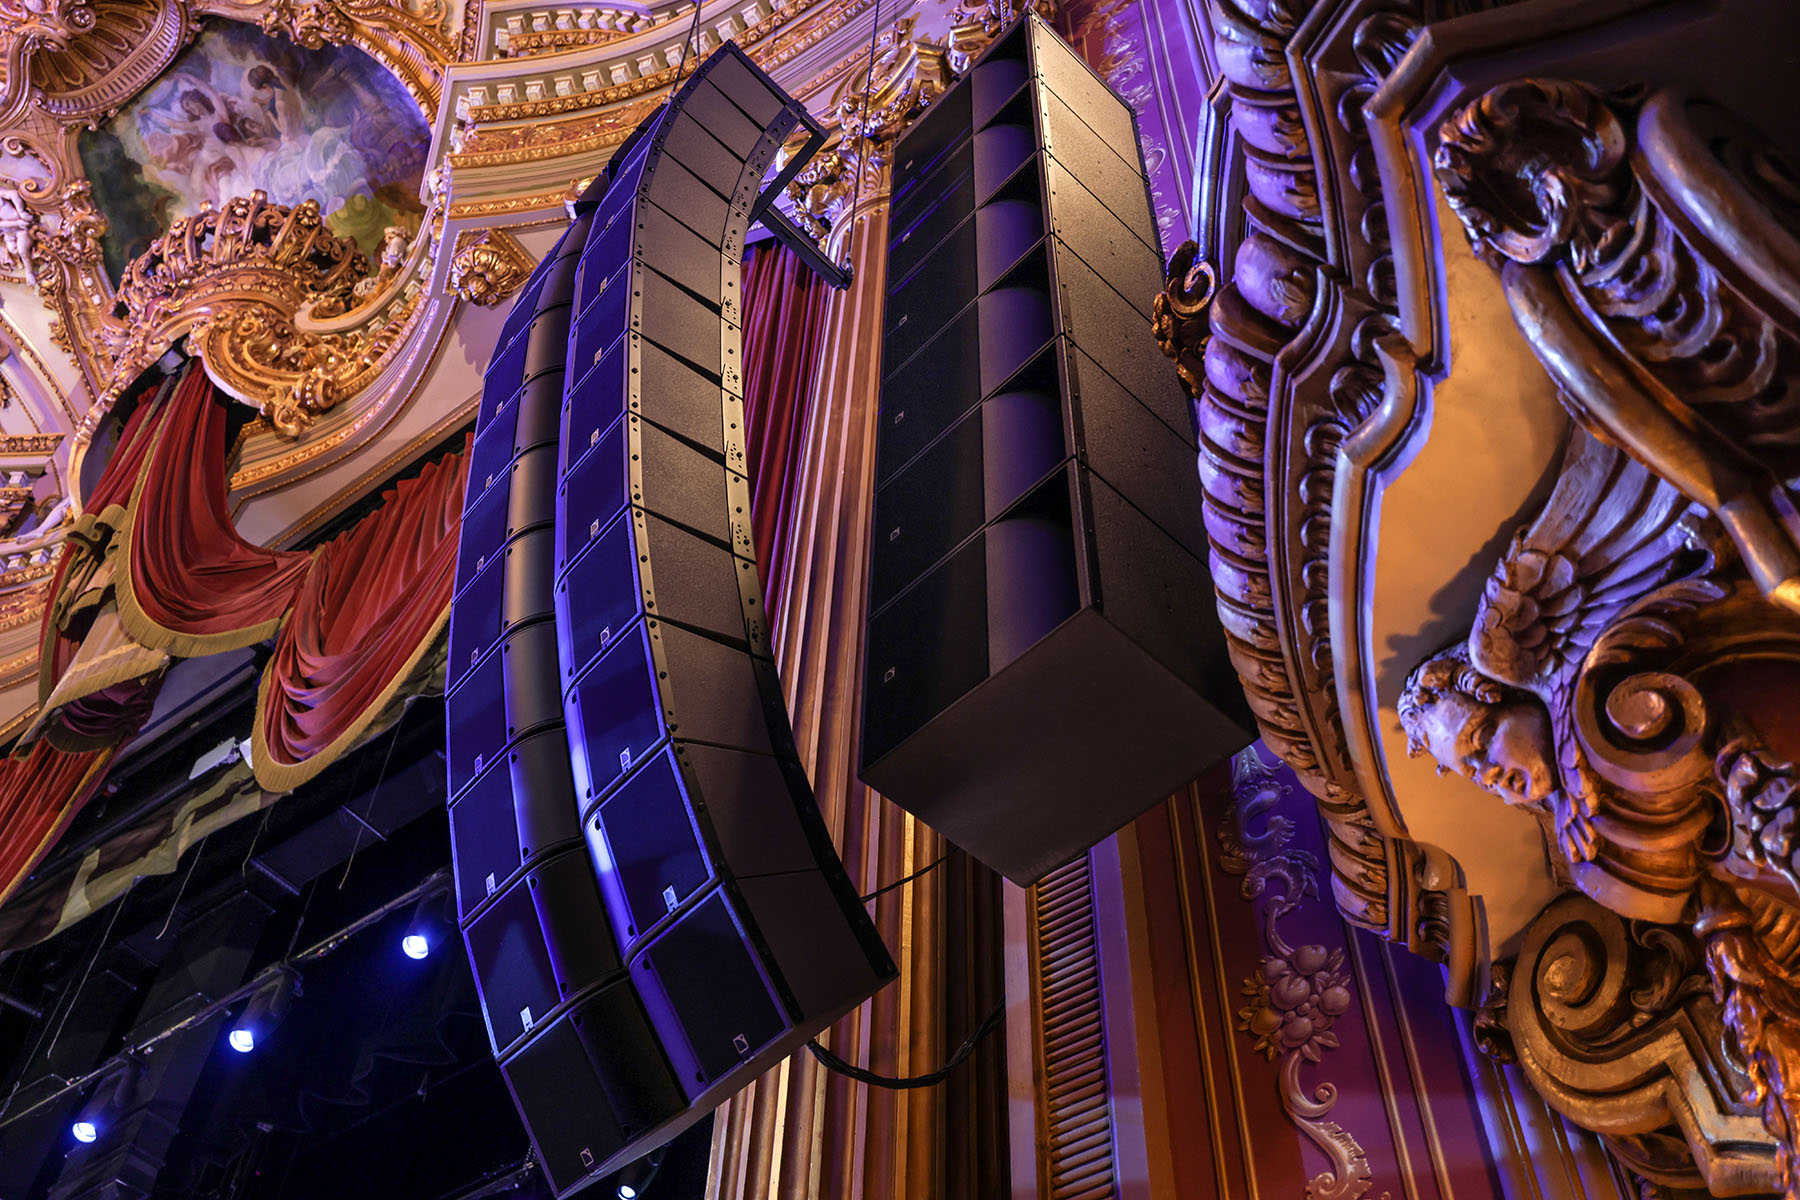 SES Integration installs a sonically beautiful sound system to match the visual splendor of an opulent New York City theatrical landmark